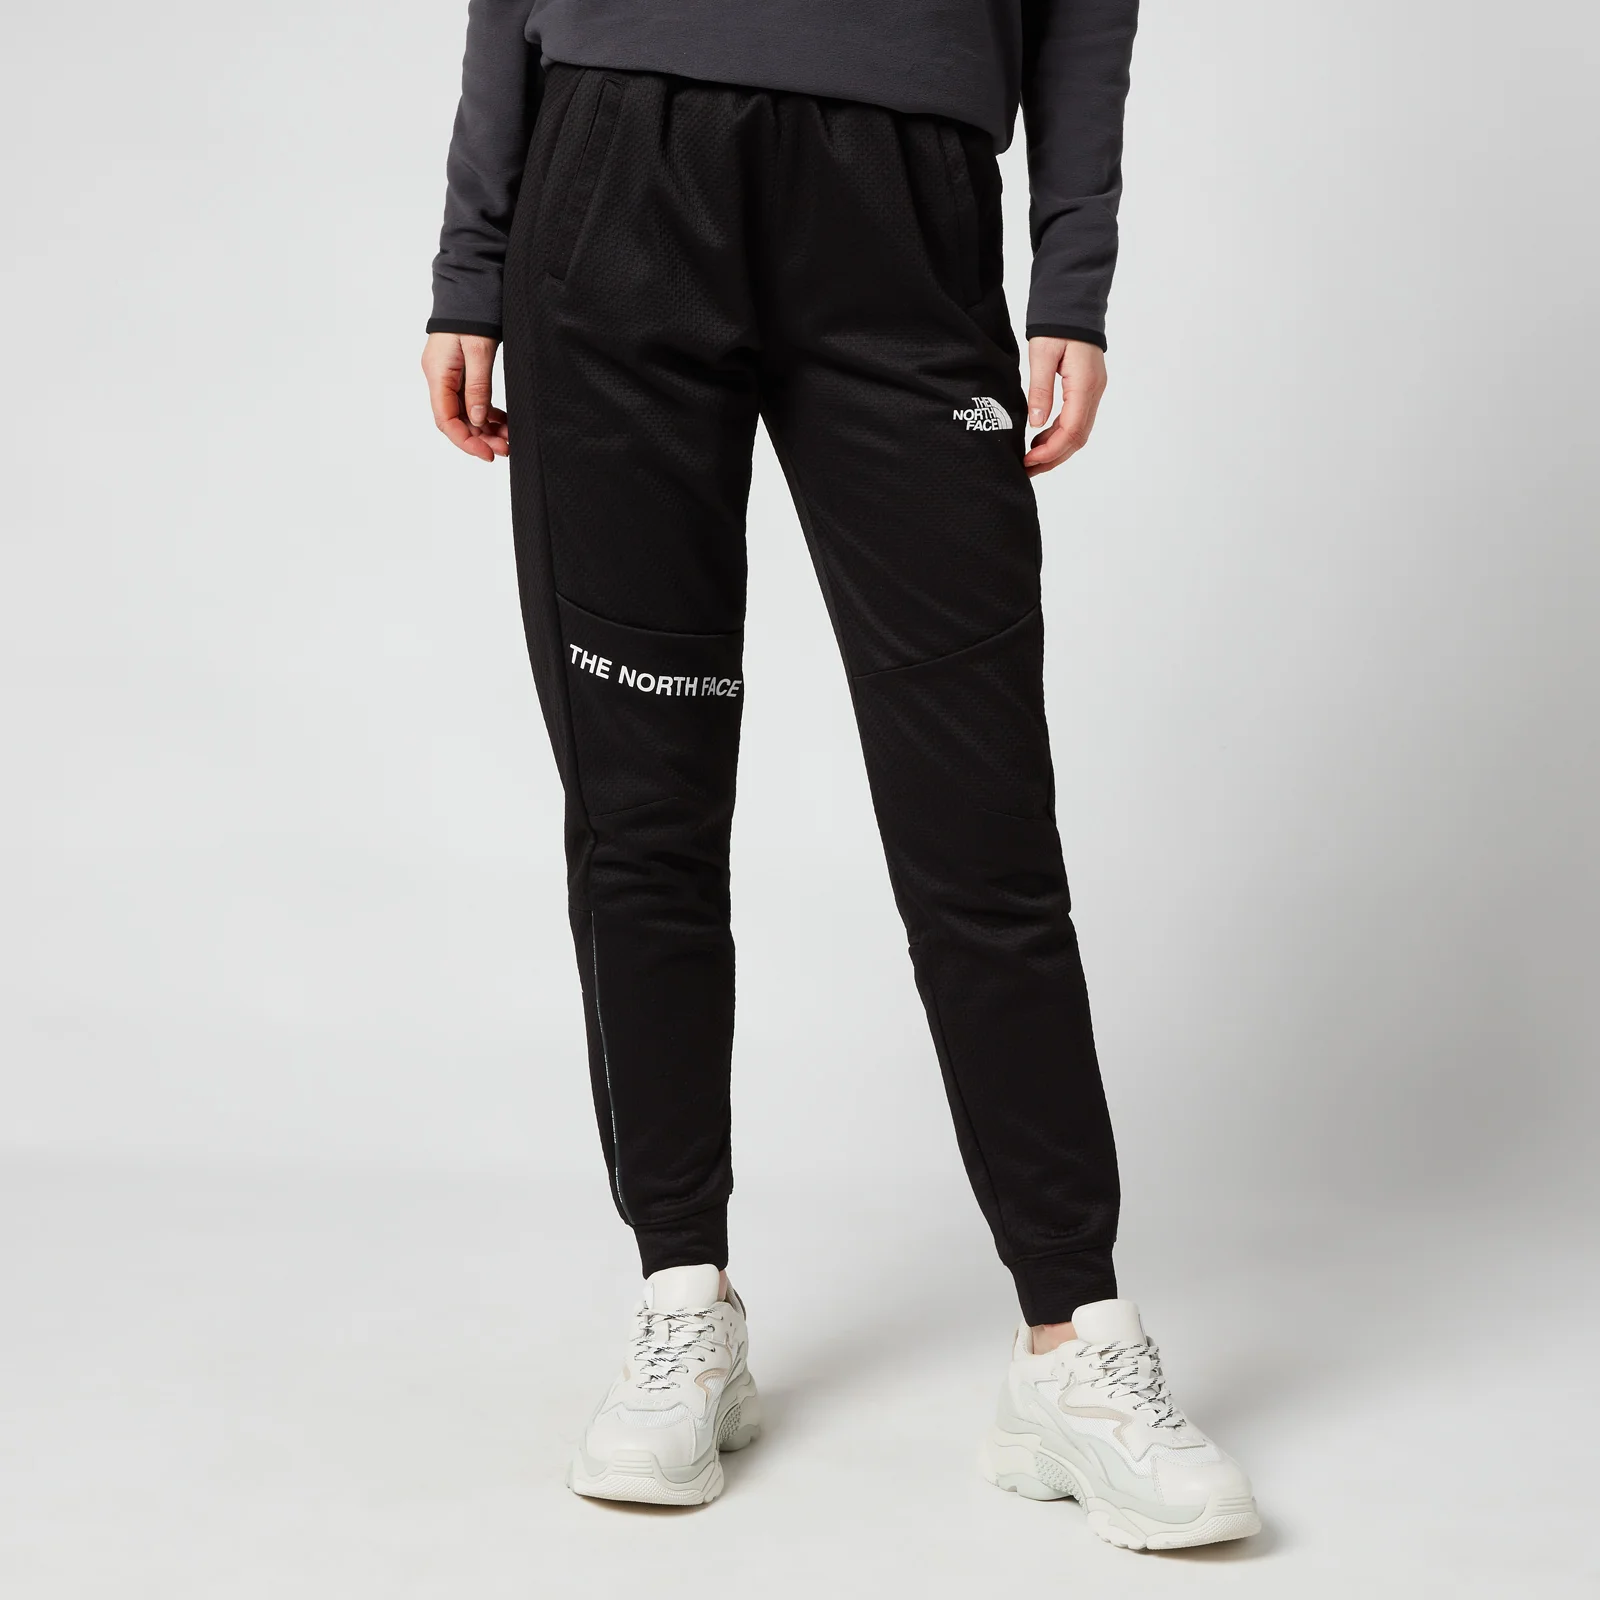 The North Face Women's Women’s Mountain Athletic Pants - Black - S Image 1